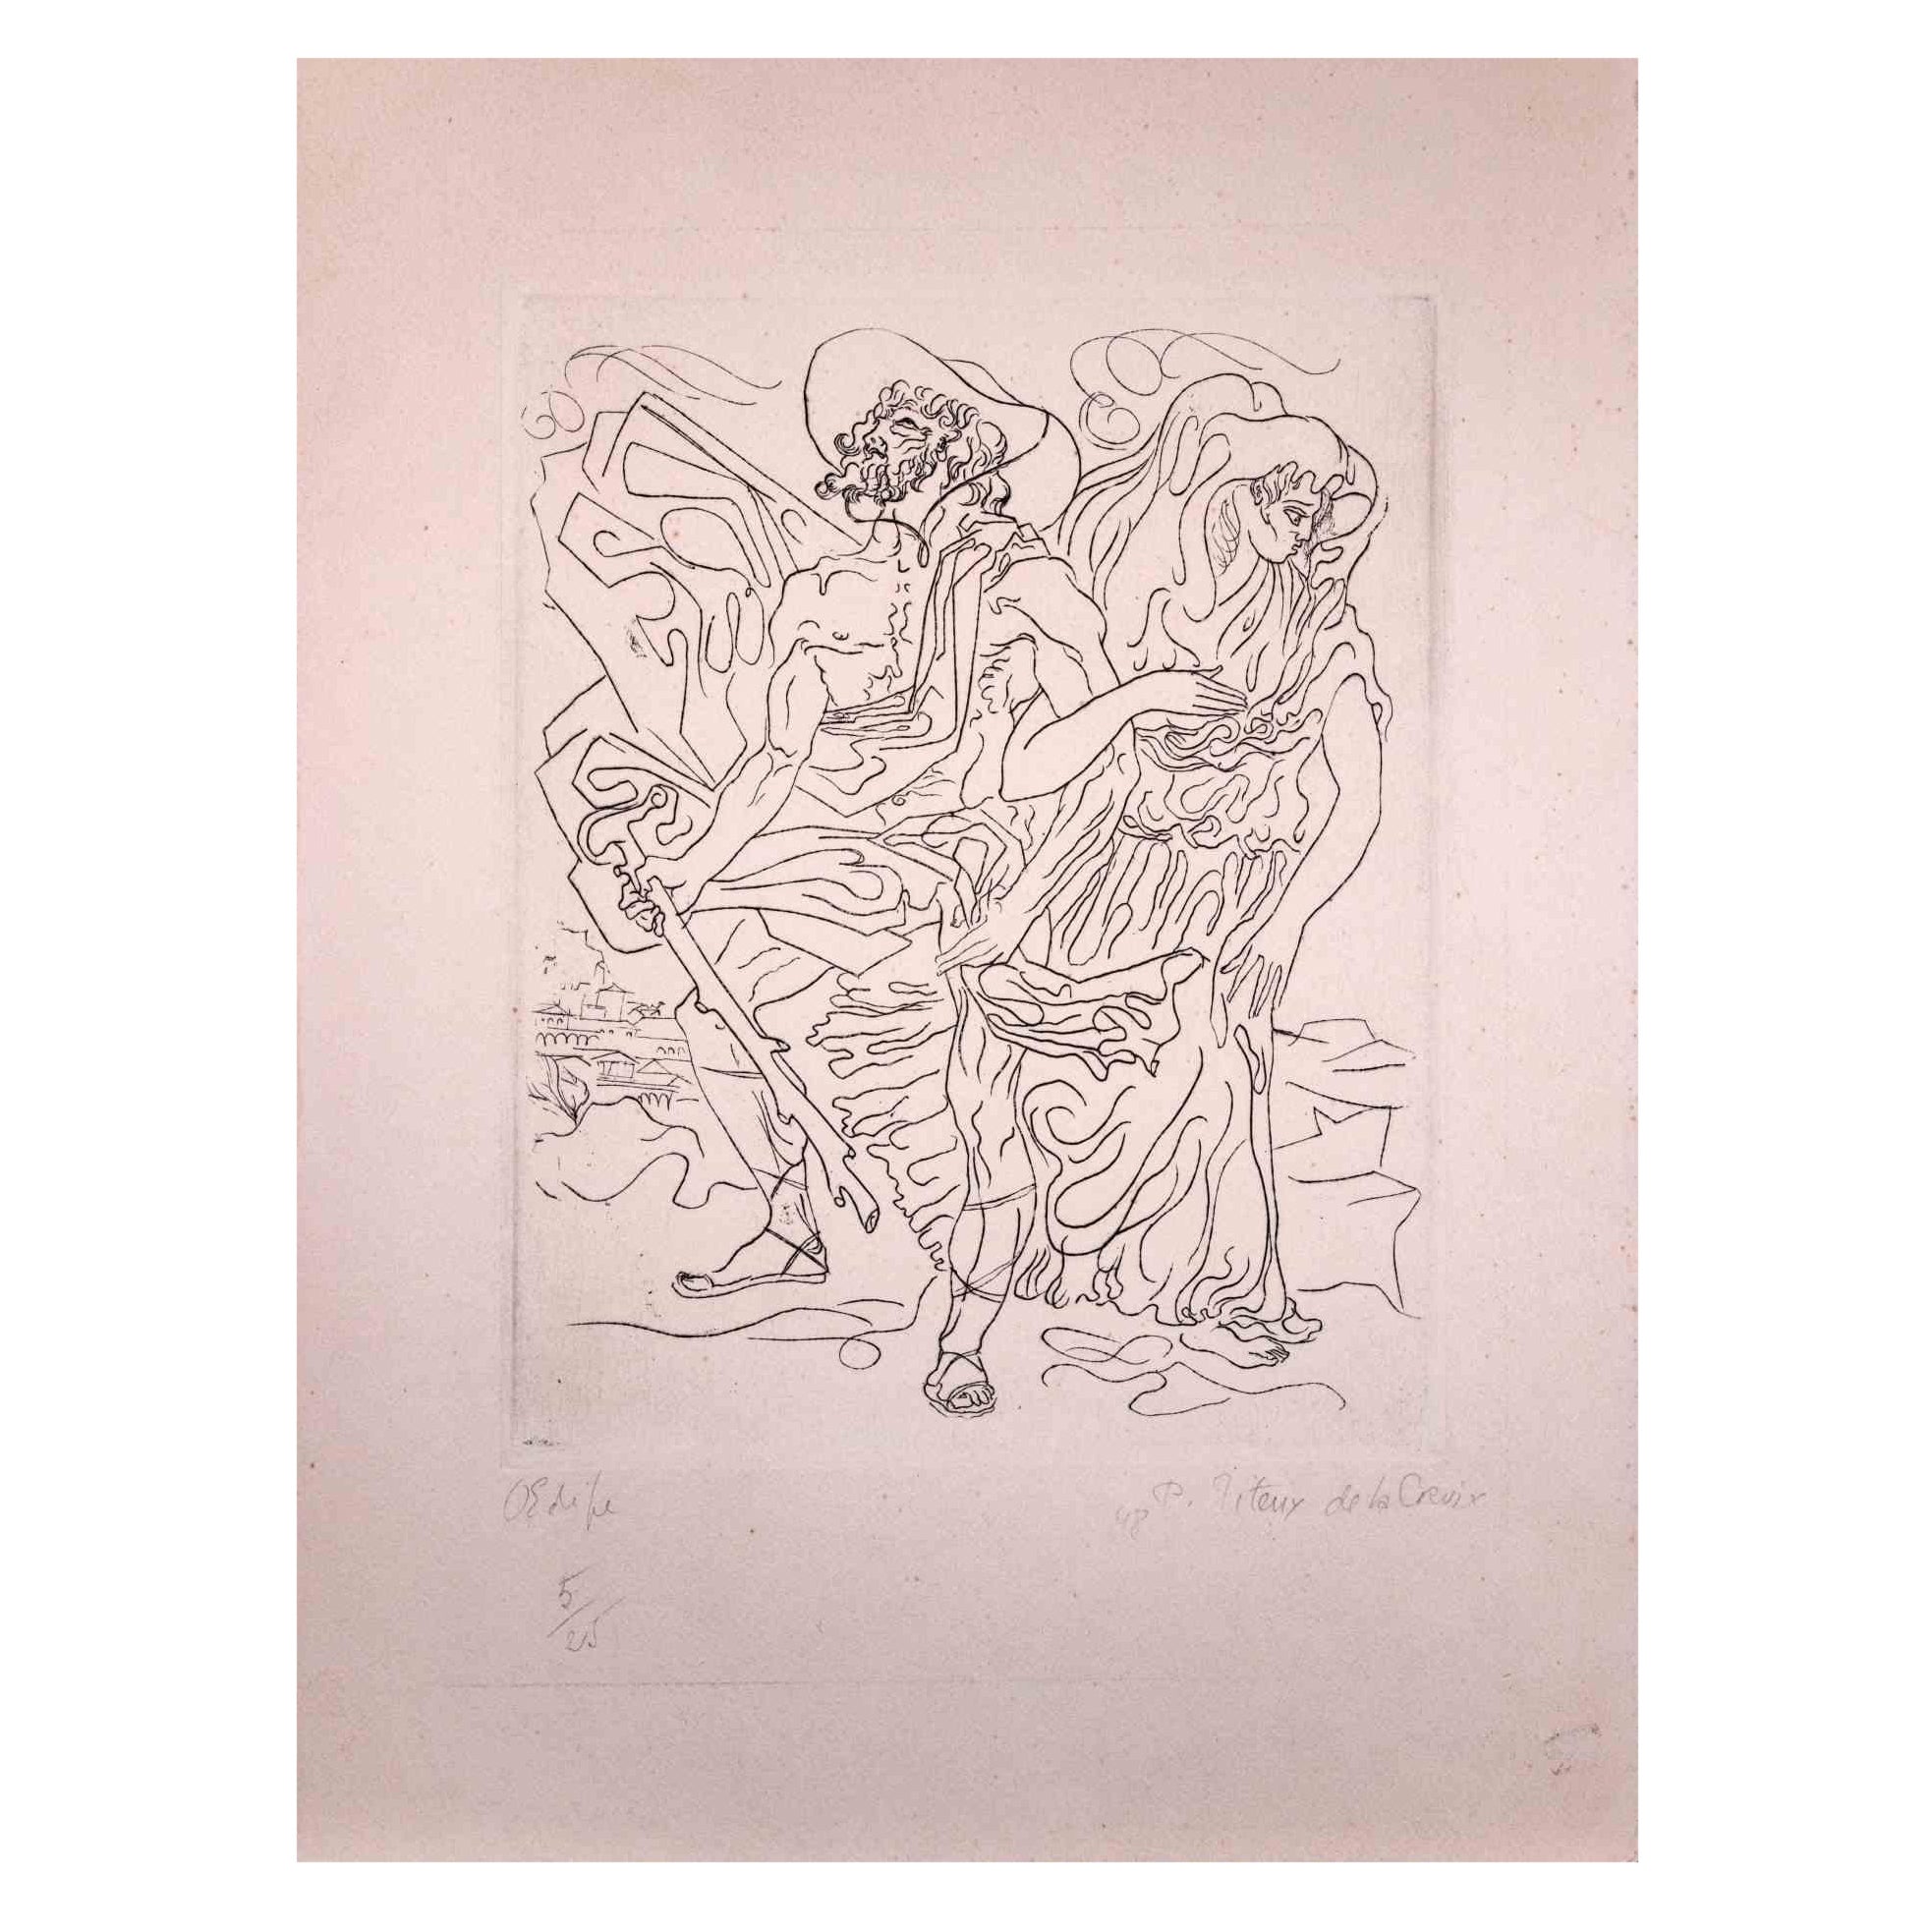 Edipe is an original Etching print realized by the artist Paul Titeux de La Croix.

Hand Signed and dated on the right corner. On the left corner titled "Edipe", es. 5/25

The artwork  is in good condition .